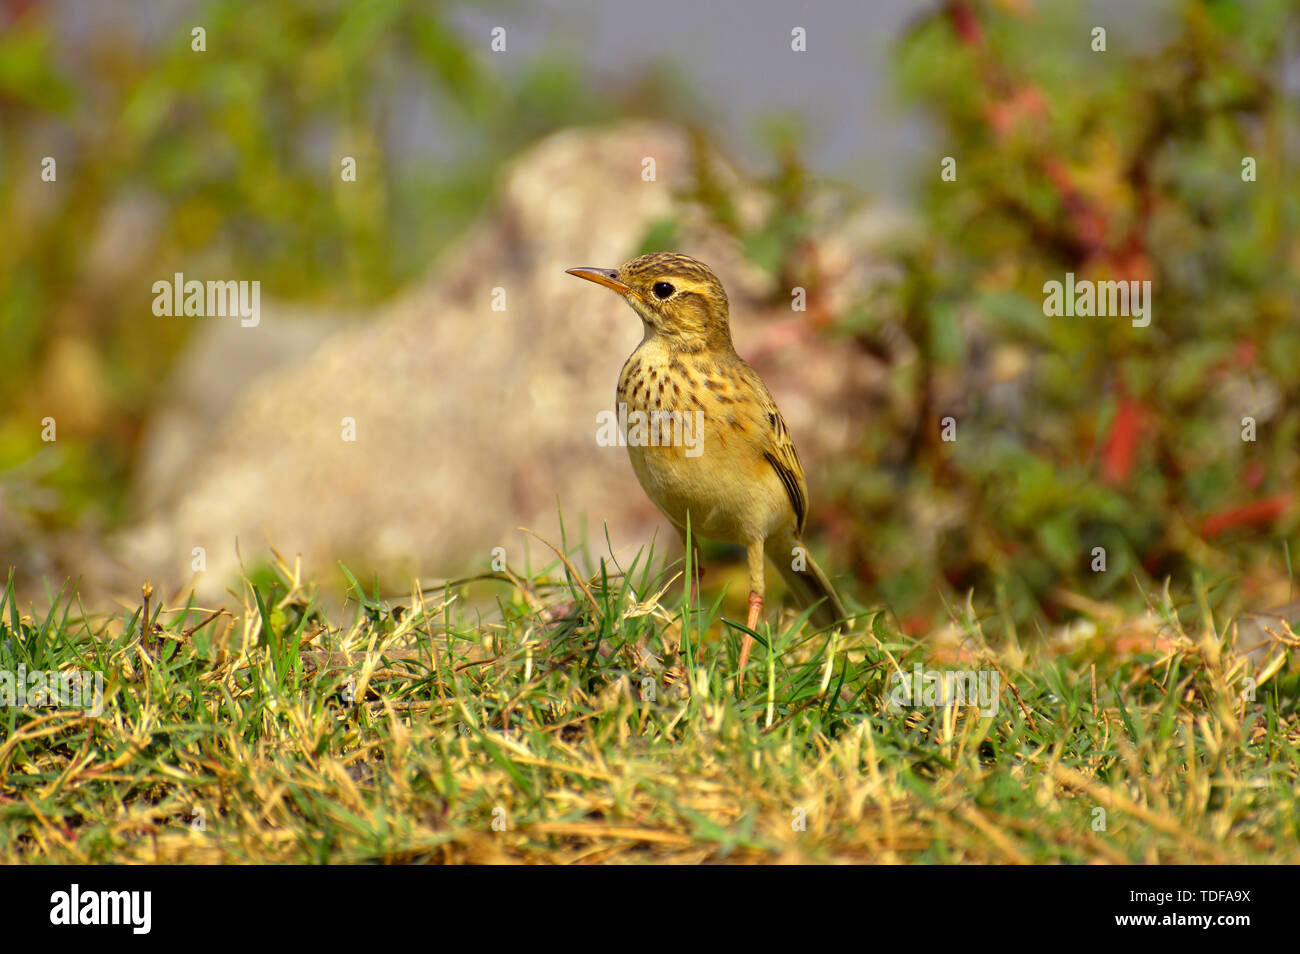 Paddyfield pipit or Oriental pipit, Anthus rufulus, standing on grass ground, Pune, Maharashtra, India. Stock Photo